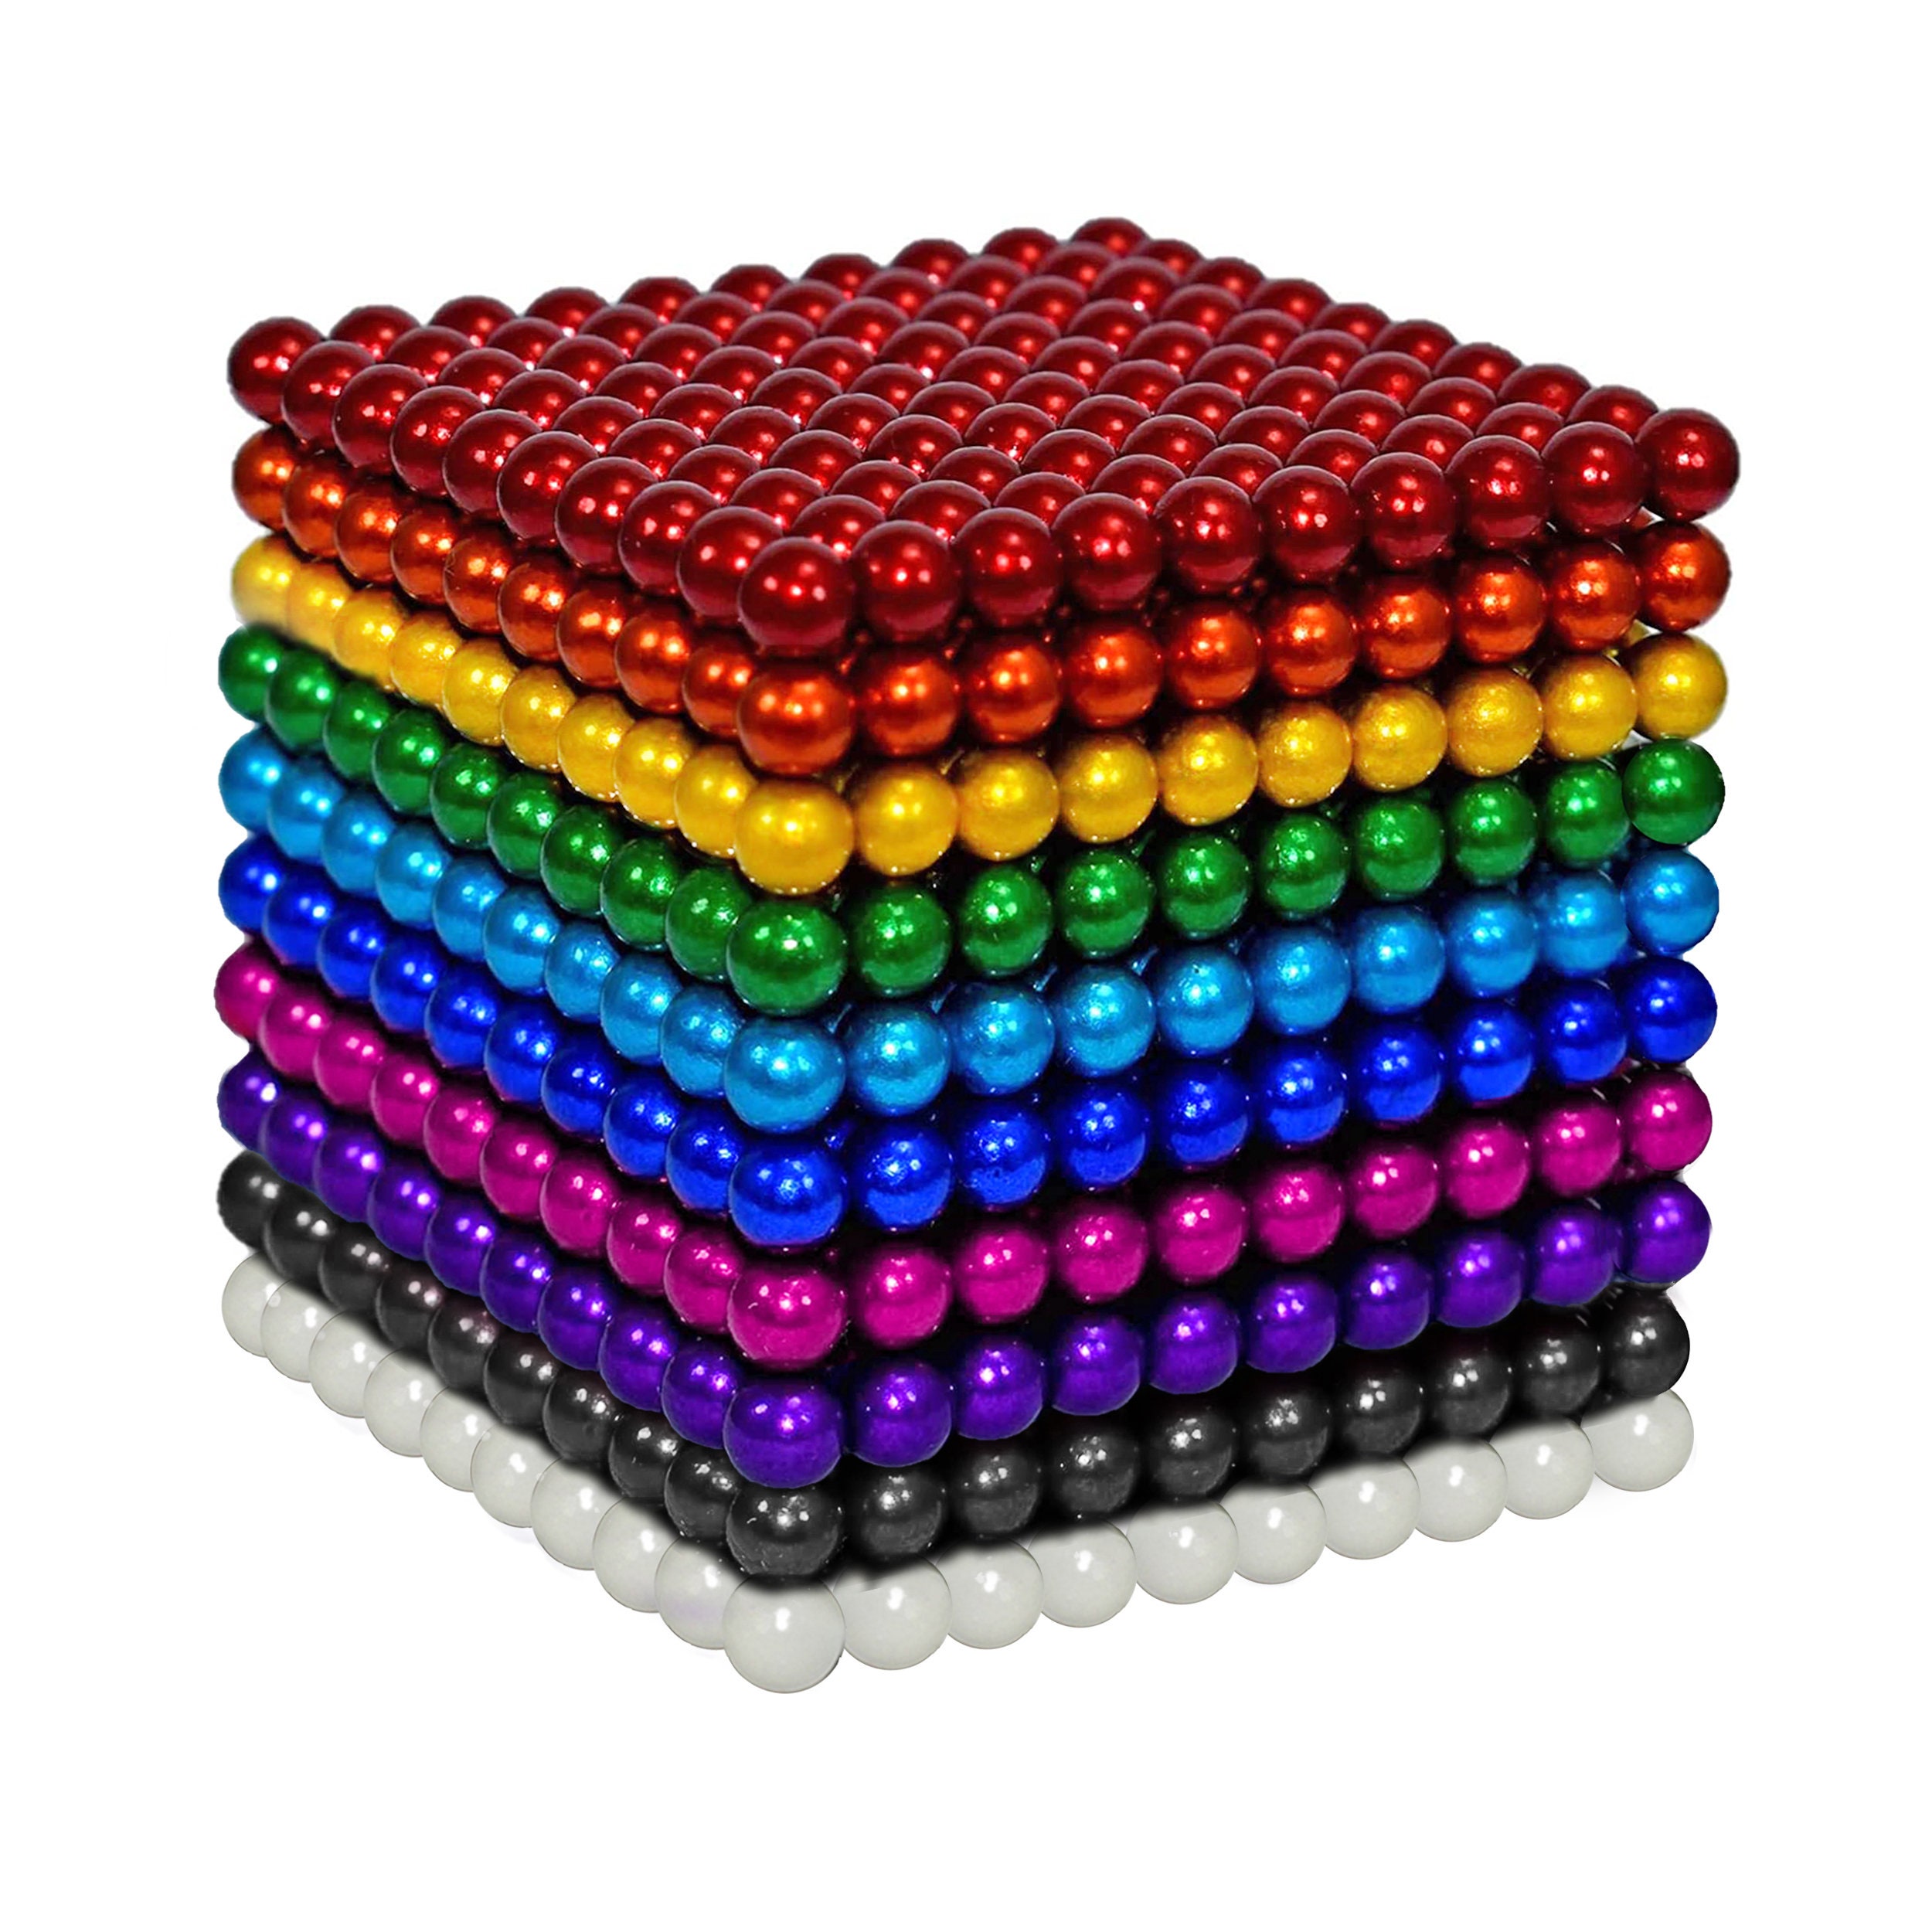 1000 Pcs 5mm Magnetic Balls for Stress Relief 